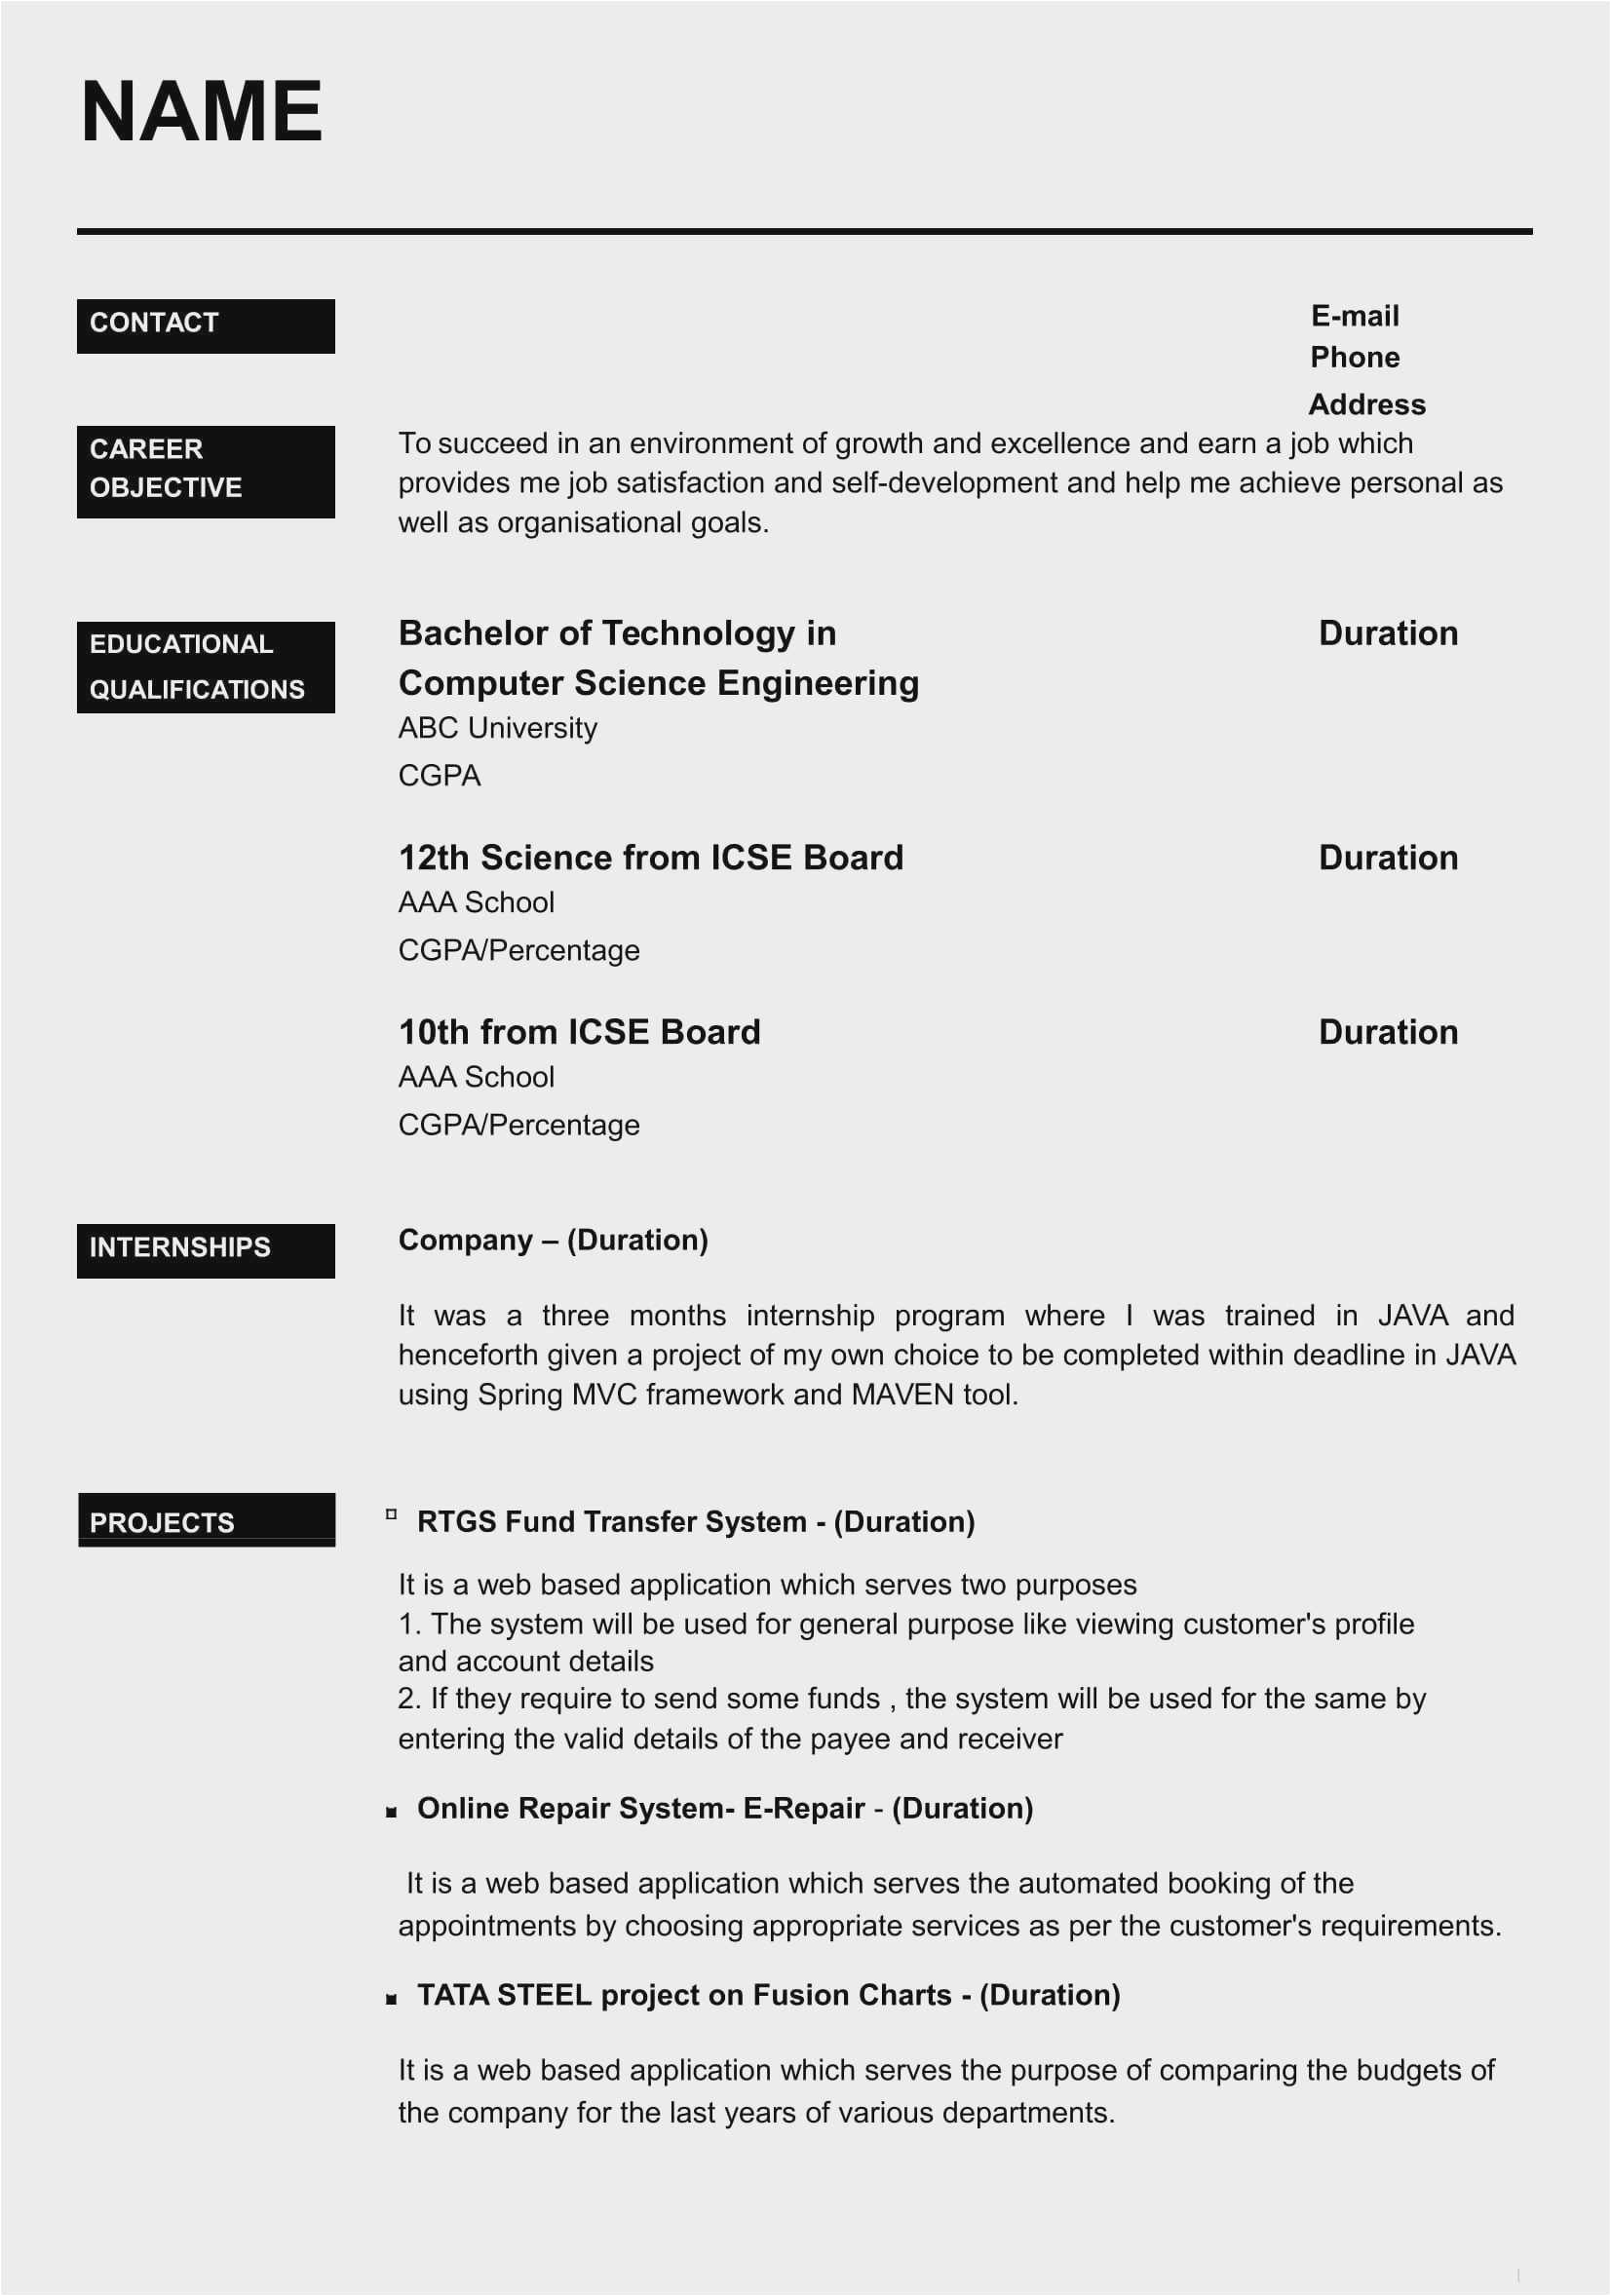 Professional Resume Templates for Freshers Free Download Resume format for Freshers Sample 56 Examples